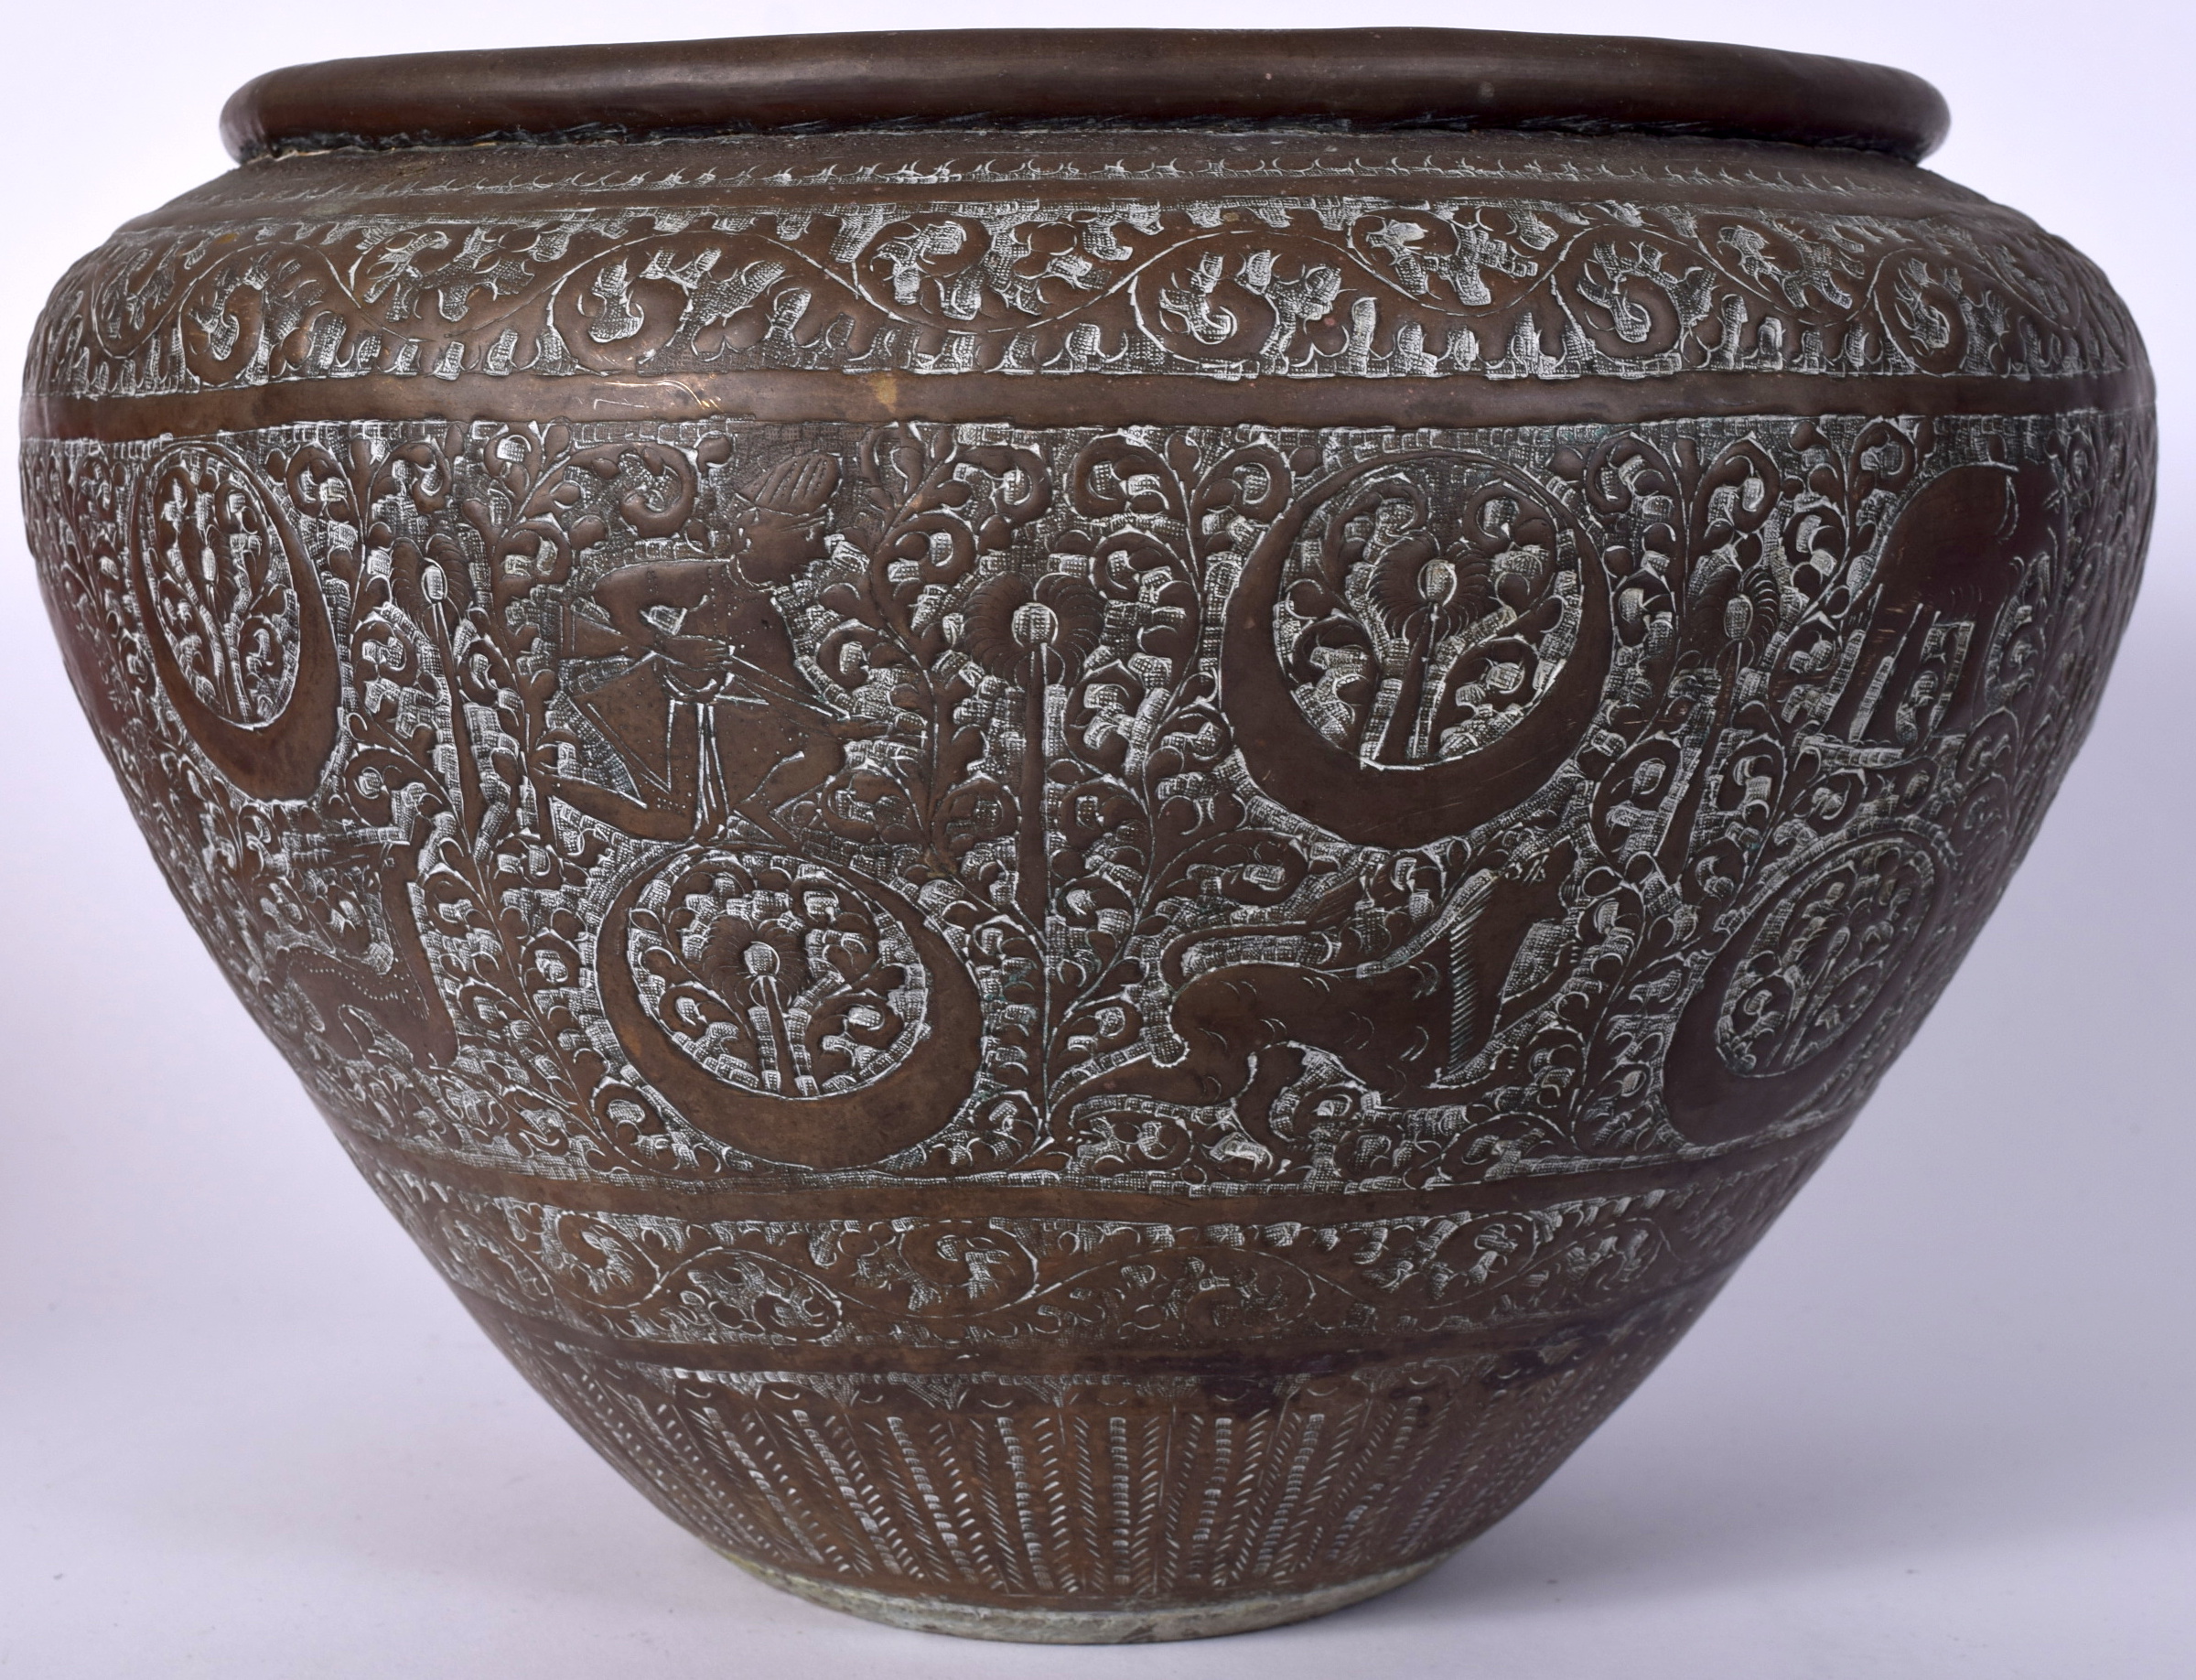 A LARGE 19TH CENTURY INDIAN BRONZE VASE JARDINIERE, decorated in relief with figures and animals am